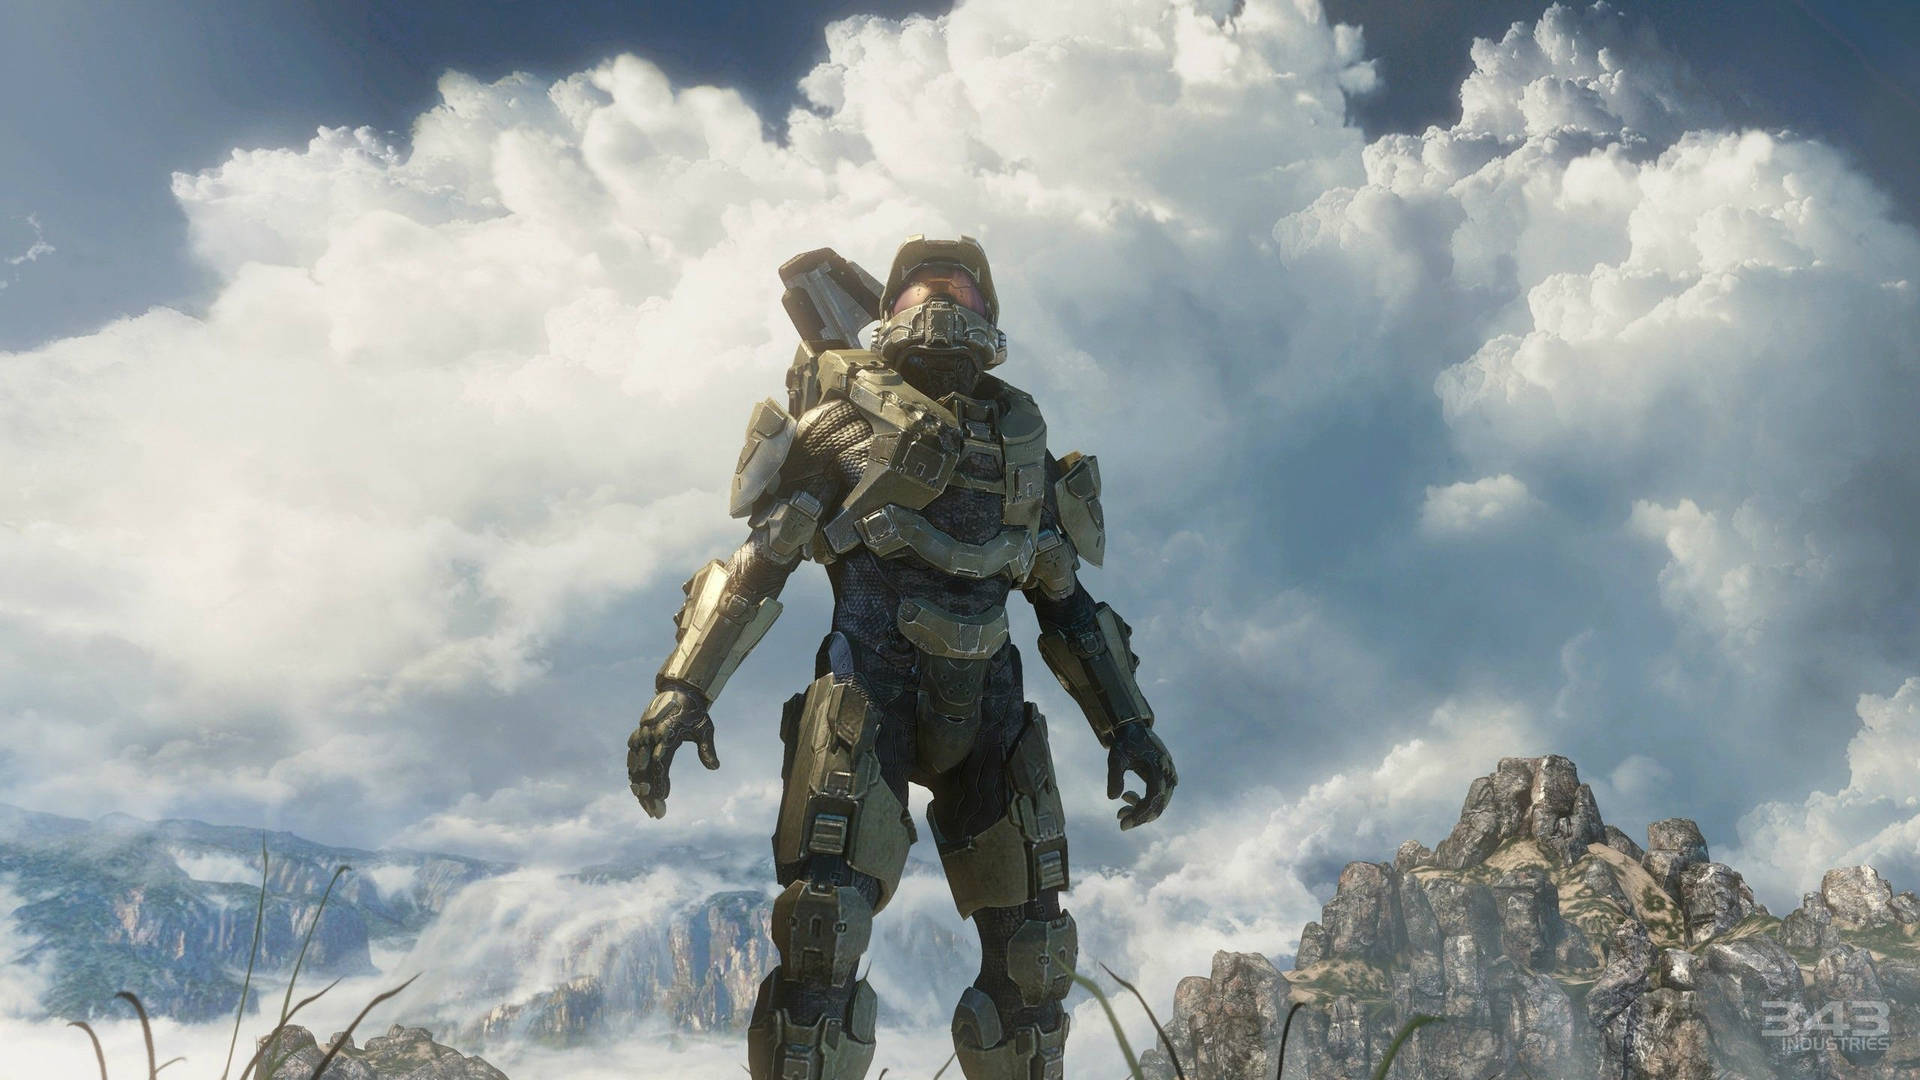 "Halo: Reach for the Skies" Wallpaper